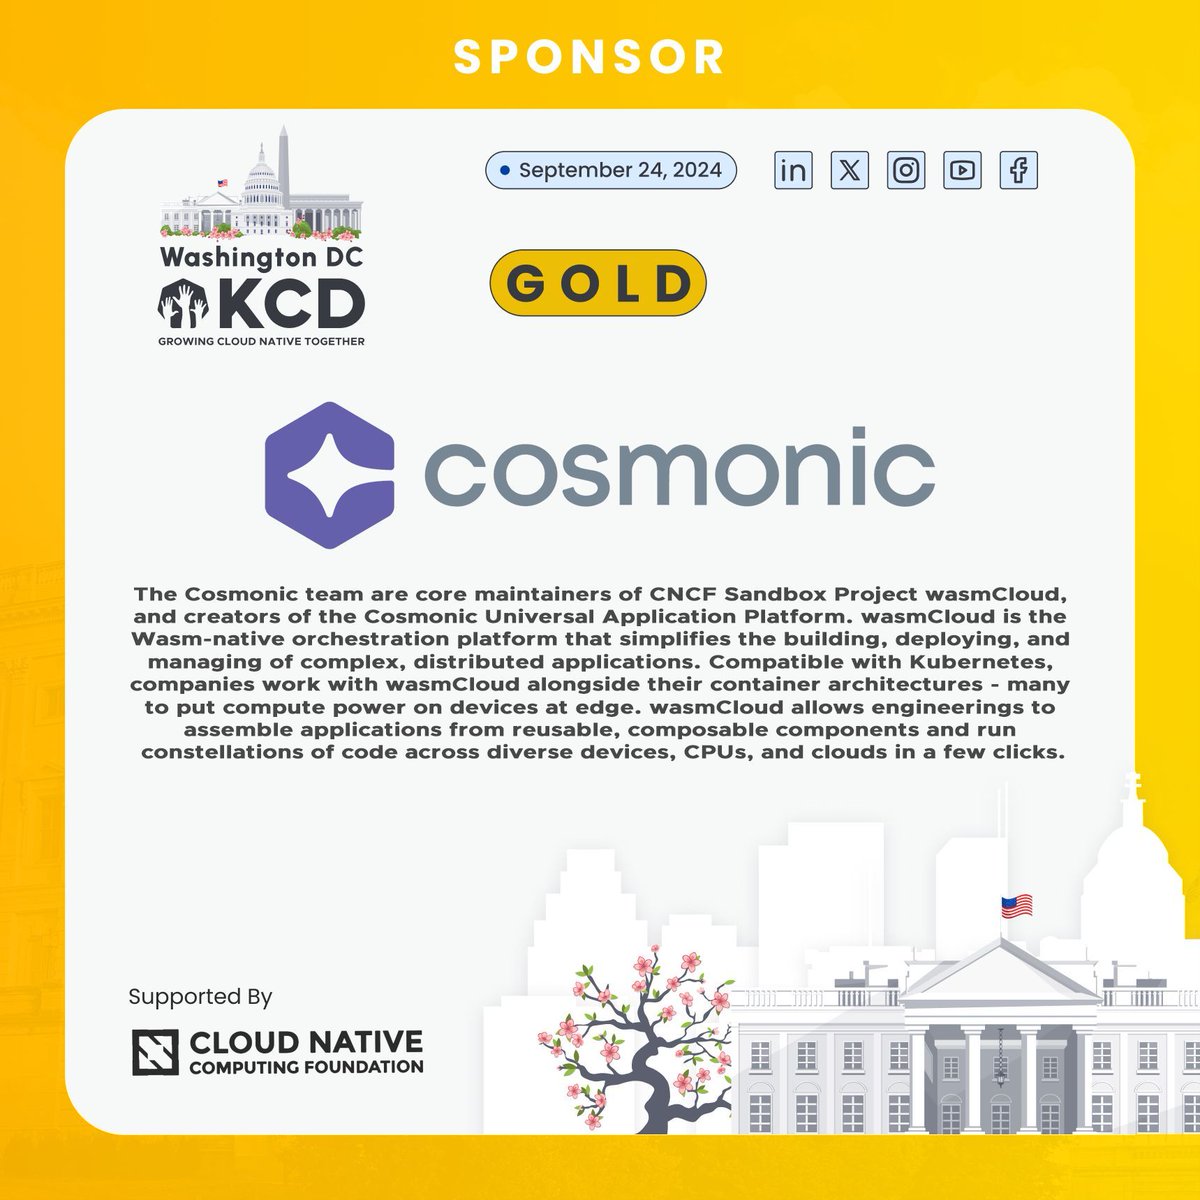 Proud to welcome @Cosmonic as a 2024 Gold Sponsor.  Cosmonic are the creators and maintainers of CNCF Sandbox Project wasmCloud. Get your discounted Early Bird ticket today! @CloudNativeFdn @kubernetesdays #wasm #wasmCloud #cloudnative
bit.ly/KCDDC2024